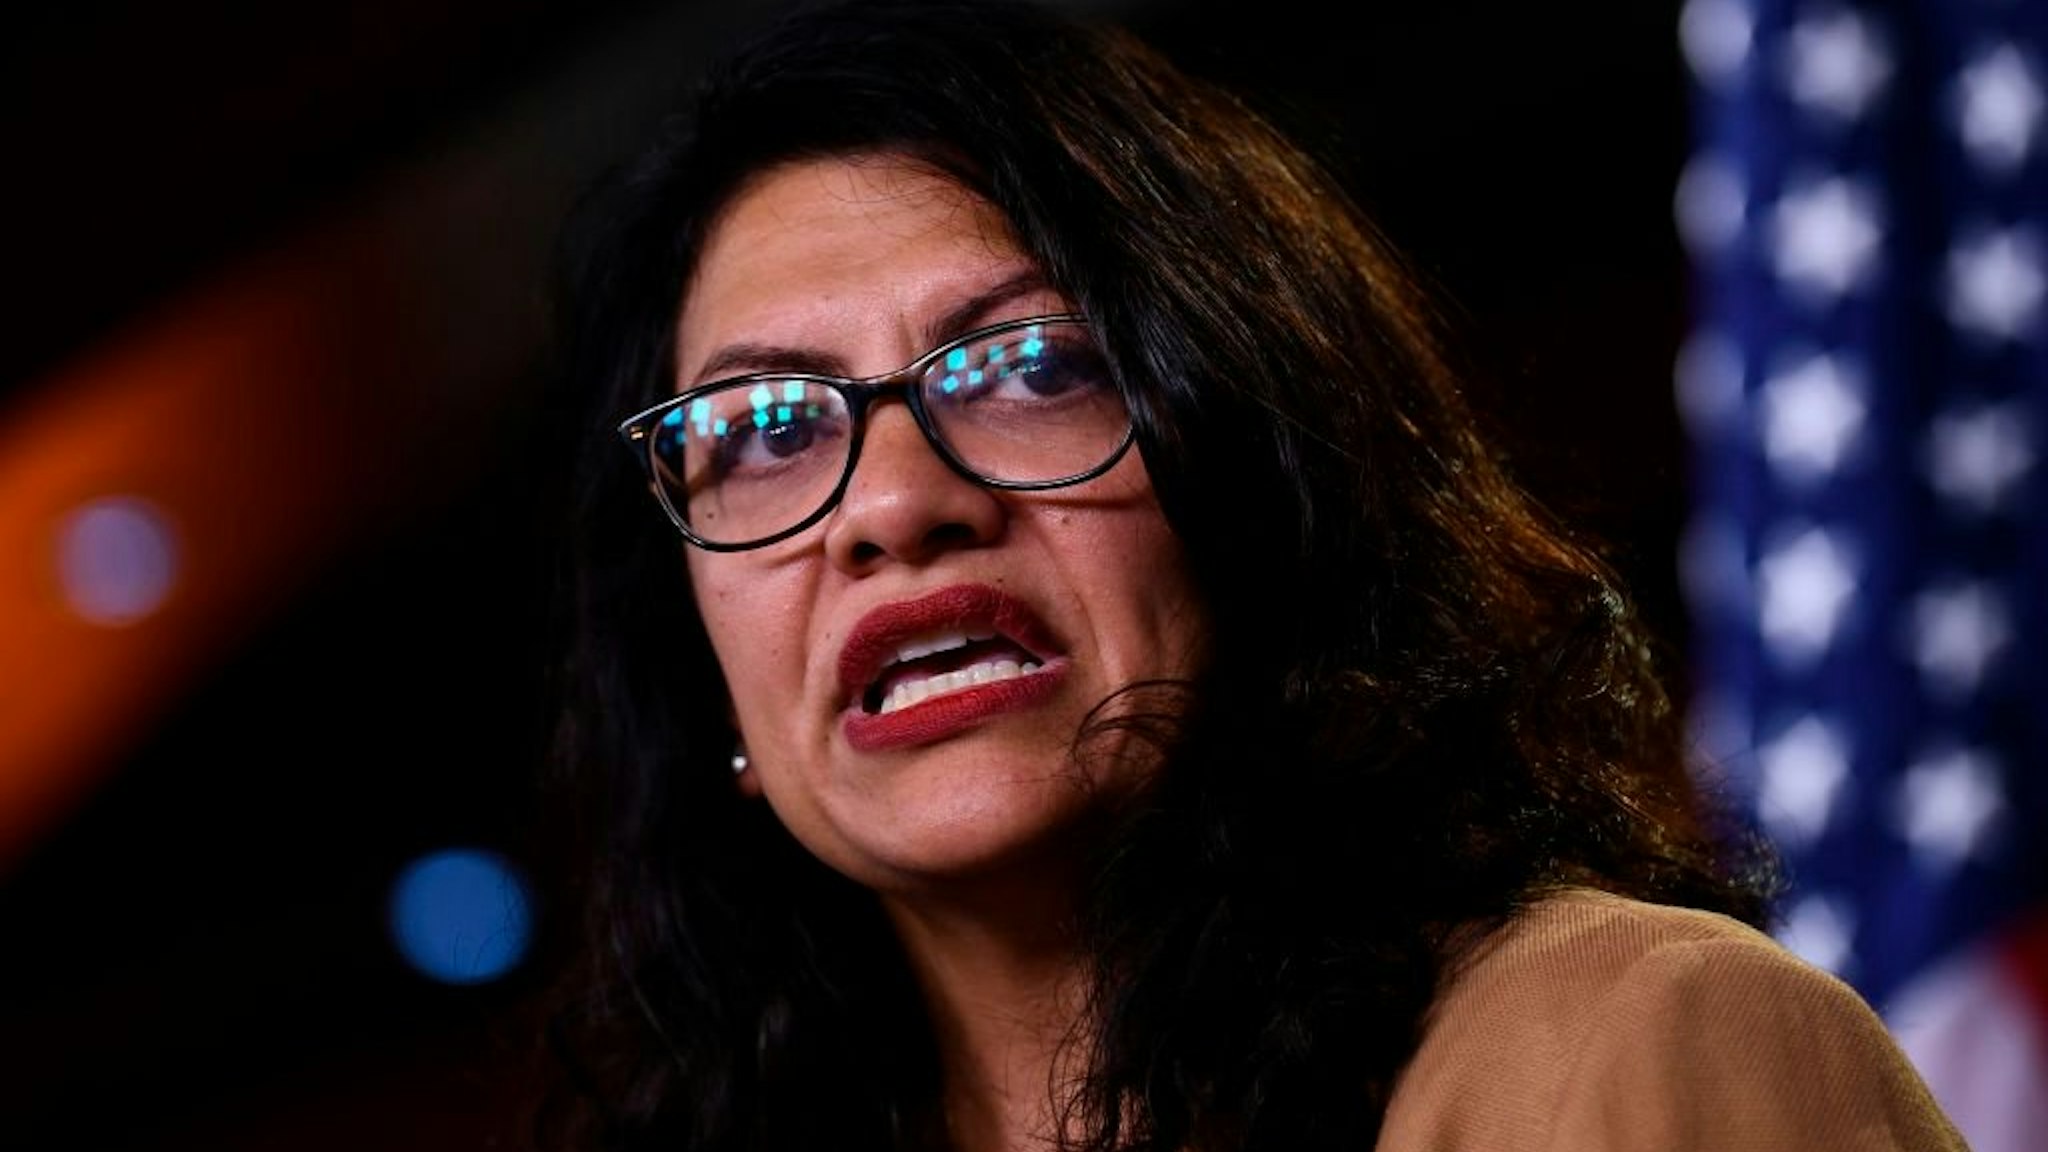 Rashida Tlaib speaks during a press conference, to address remarks made by US President Donald Trump earlier in the day